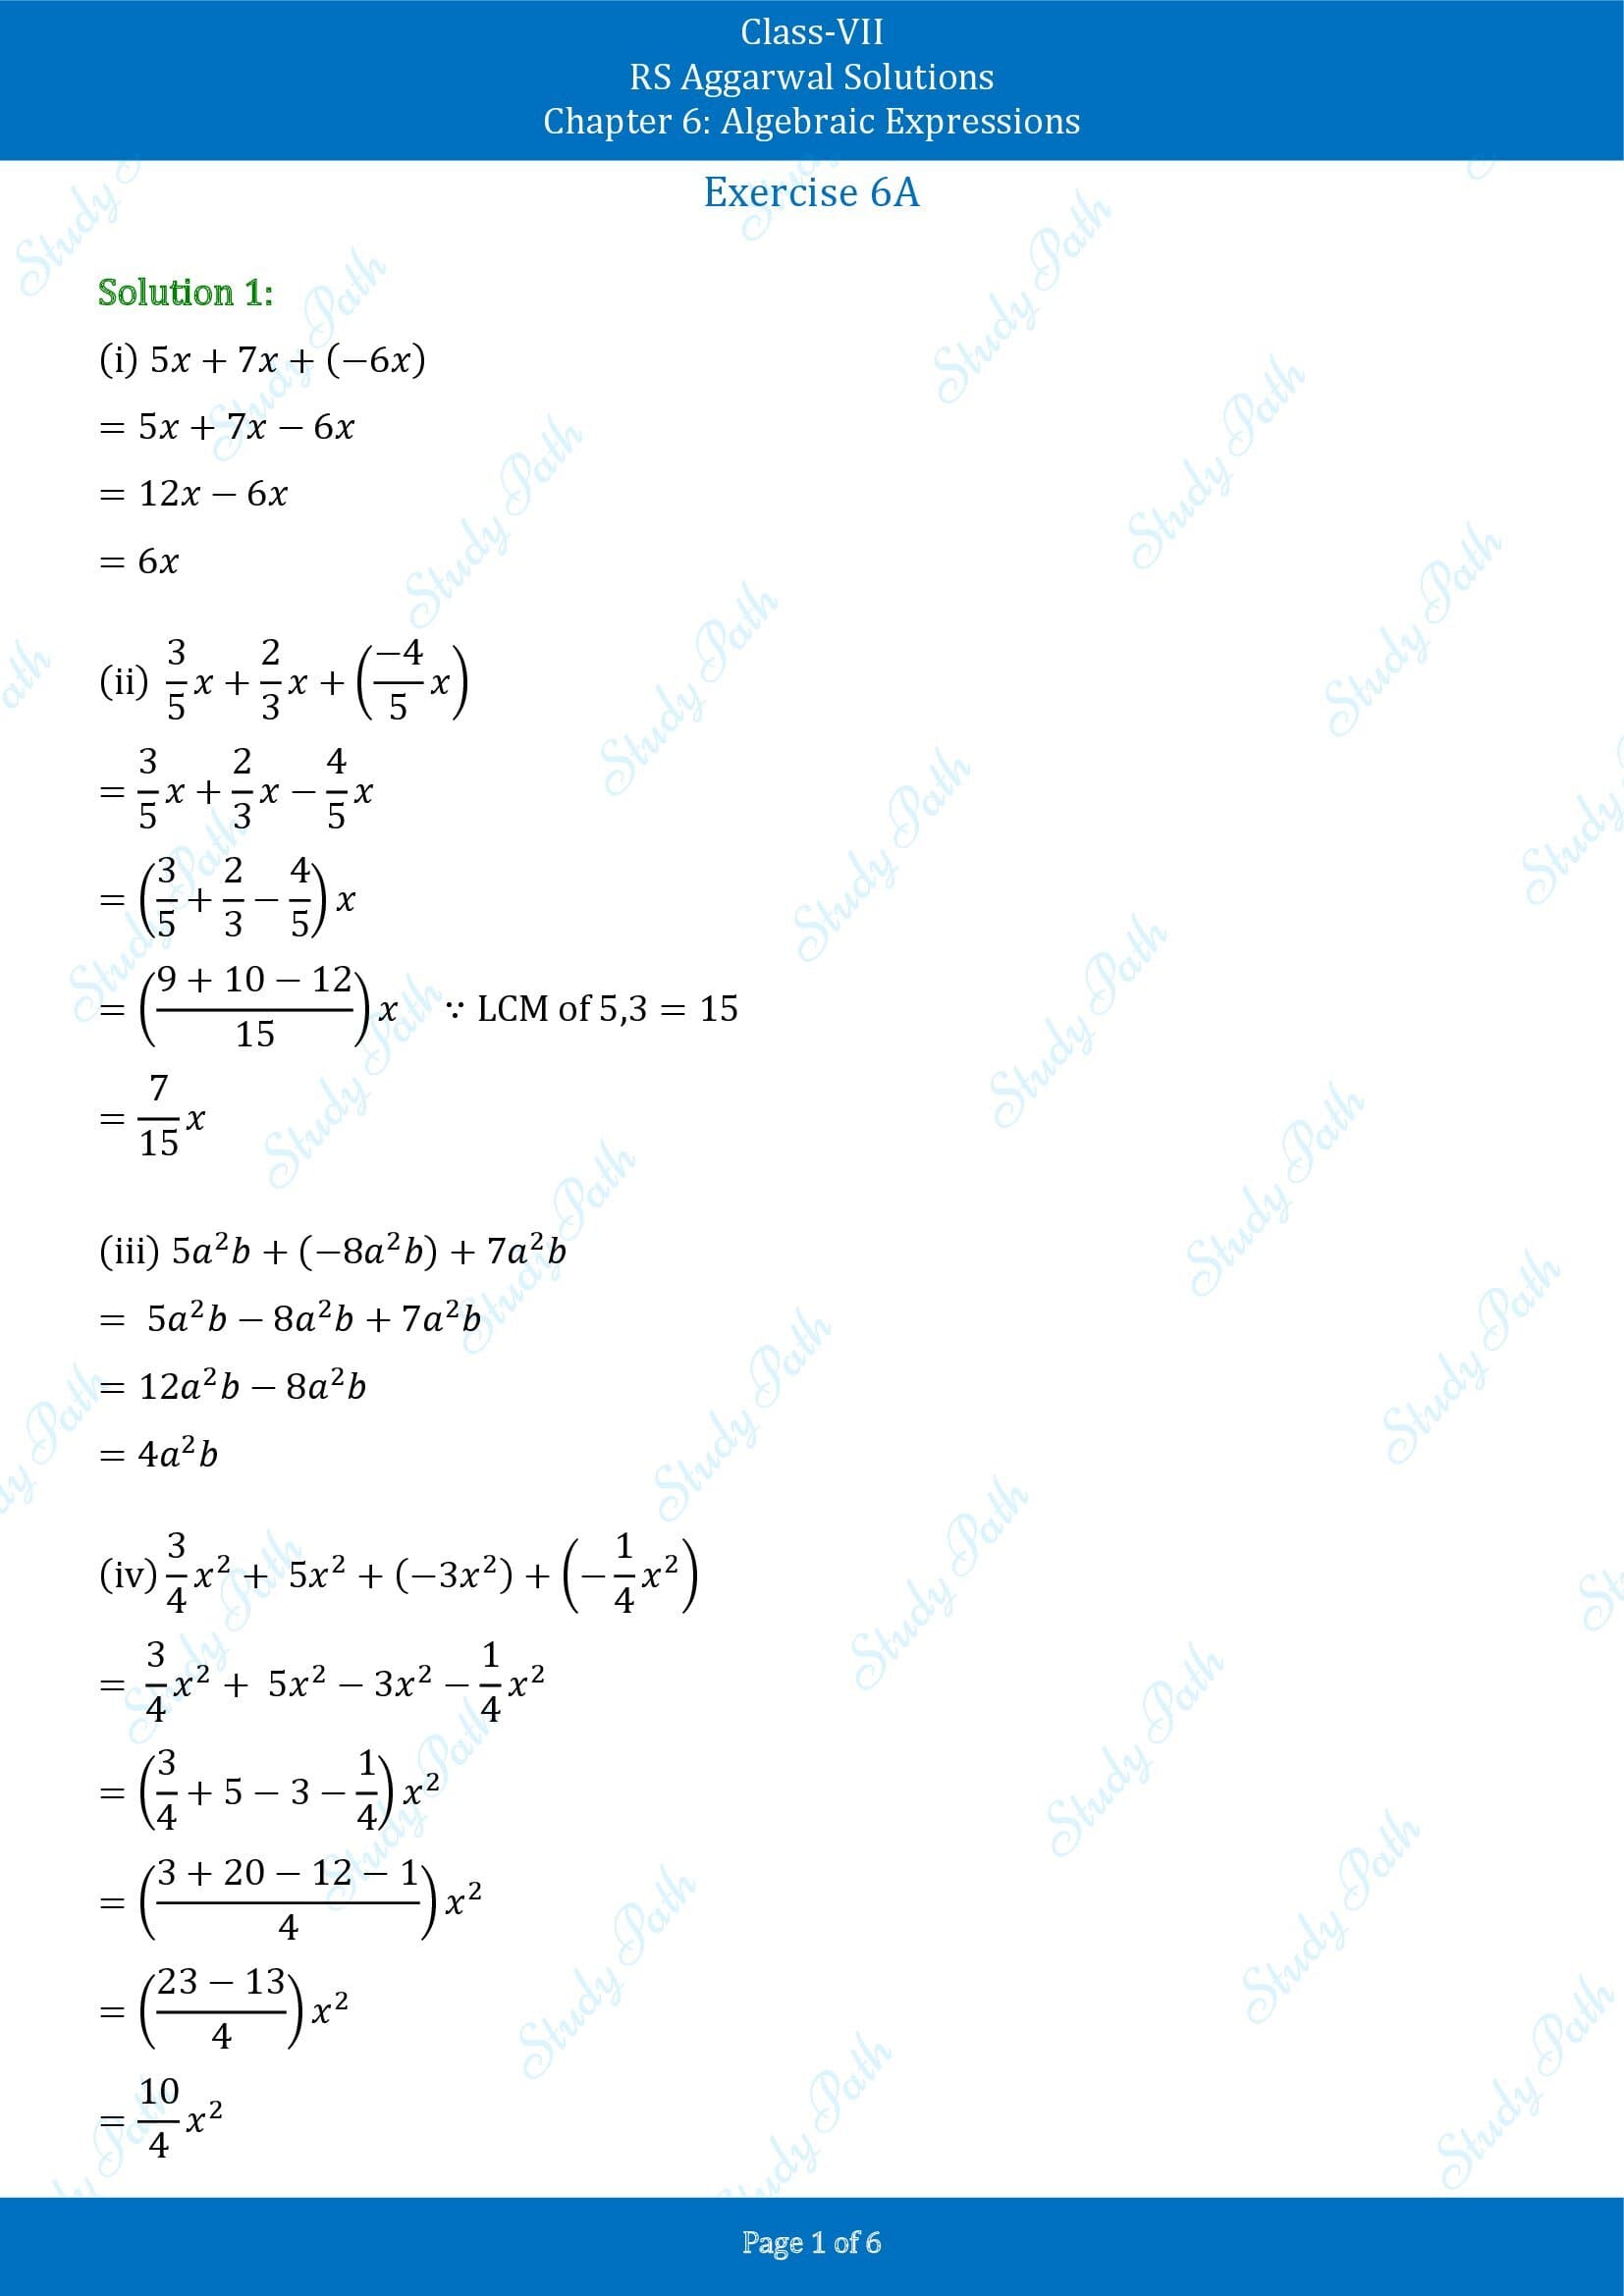 RS Aggarwal Solutions Class 7 Chapter 6 Algebraic Expresions Exercise 6A 00001